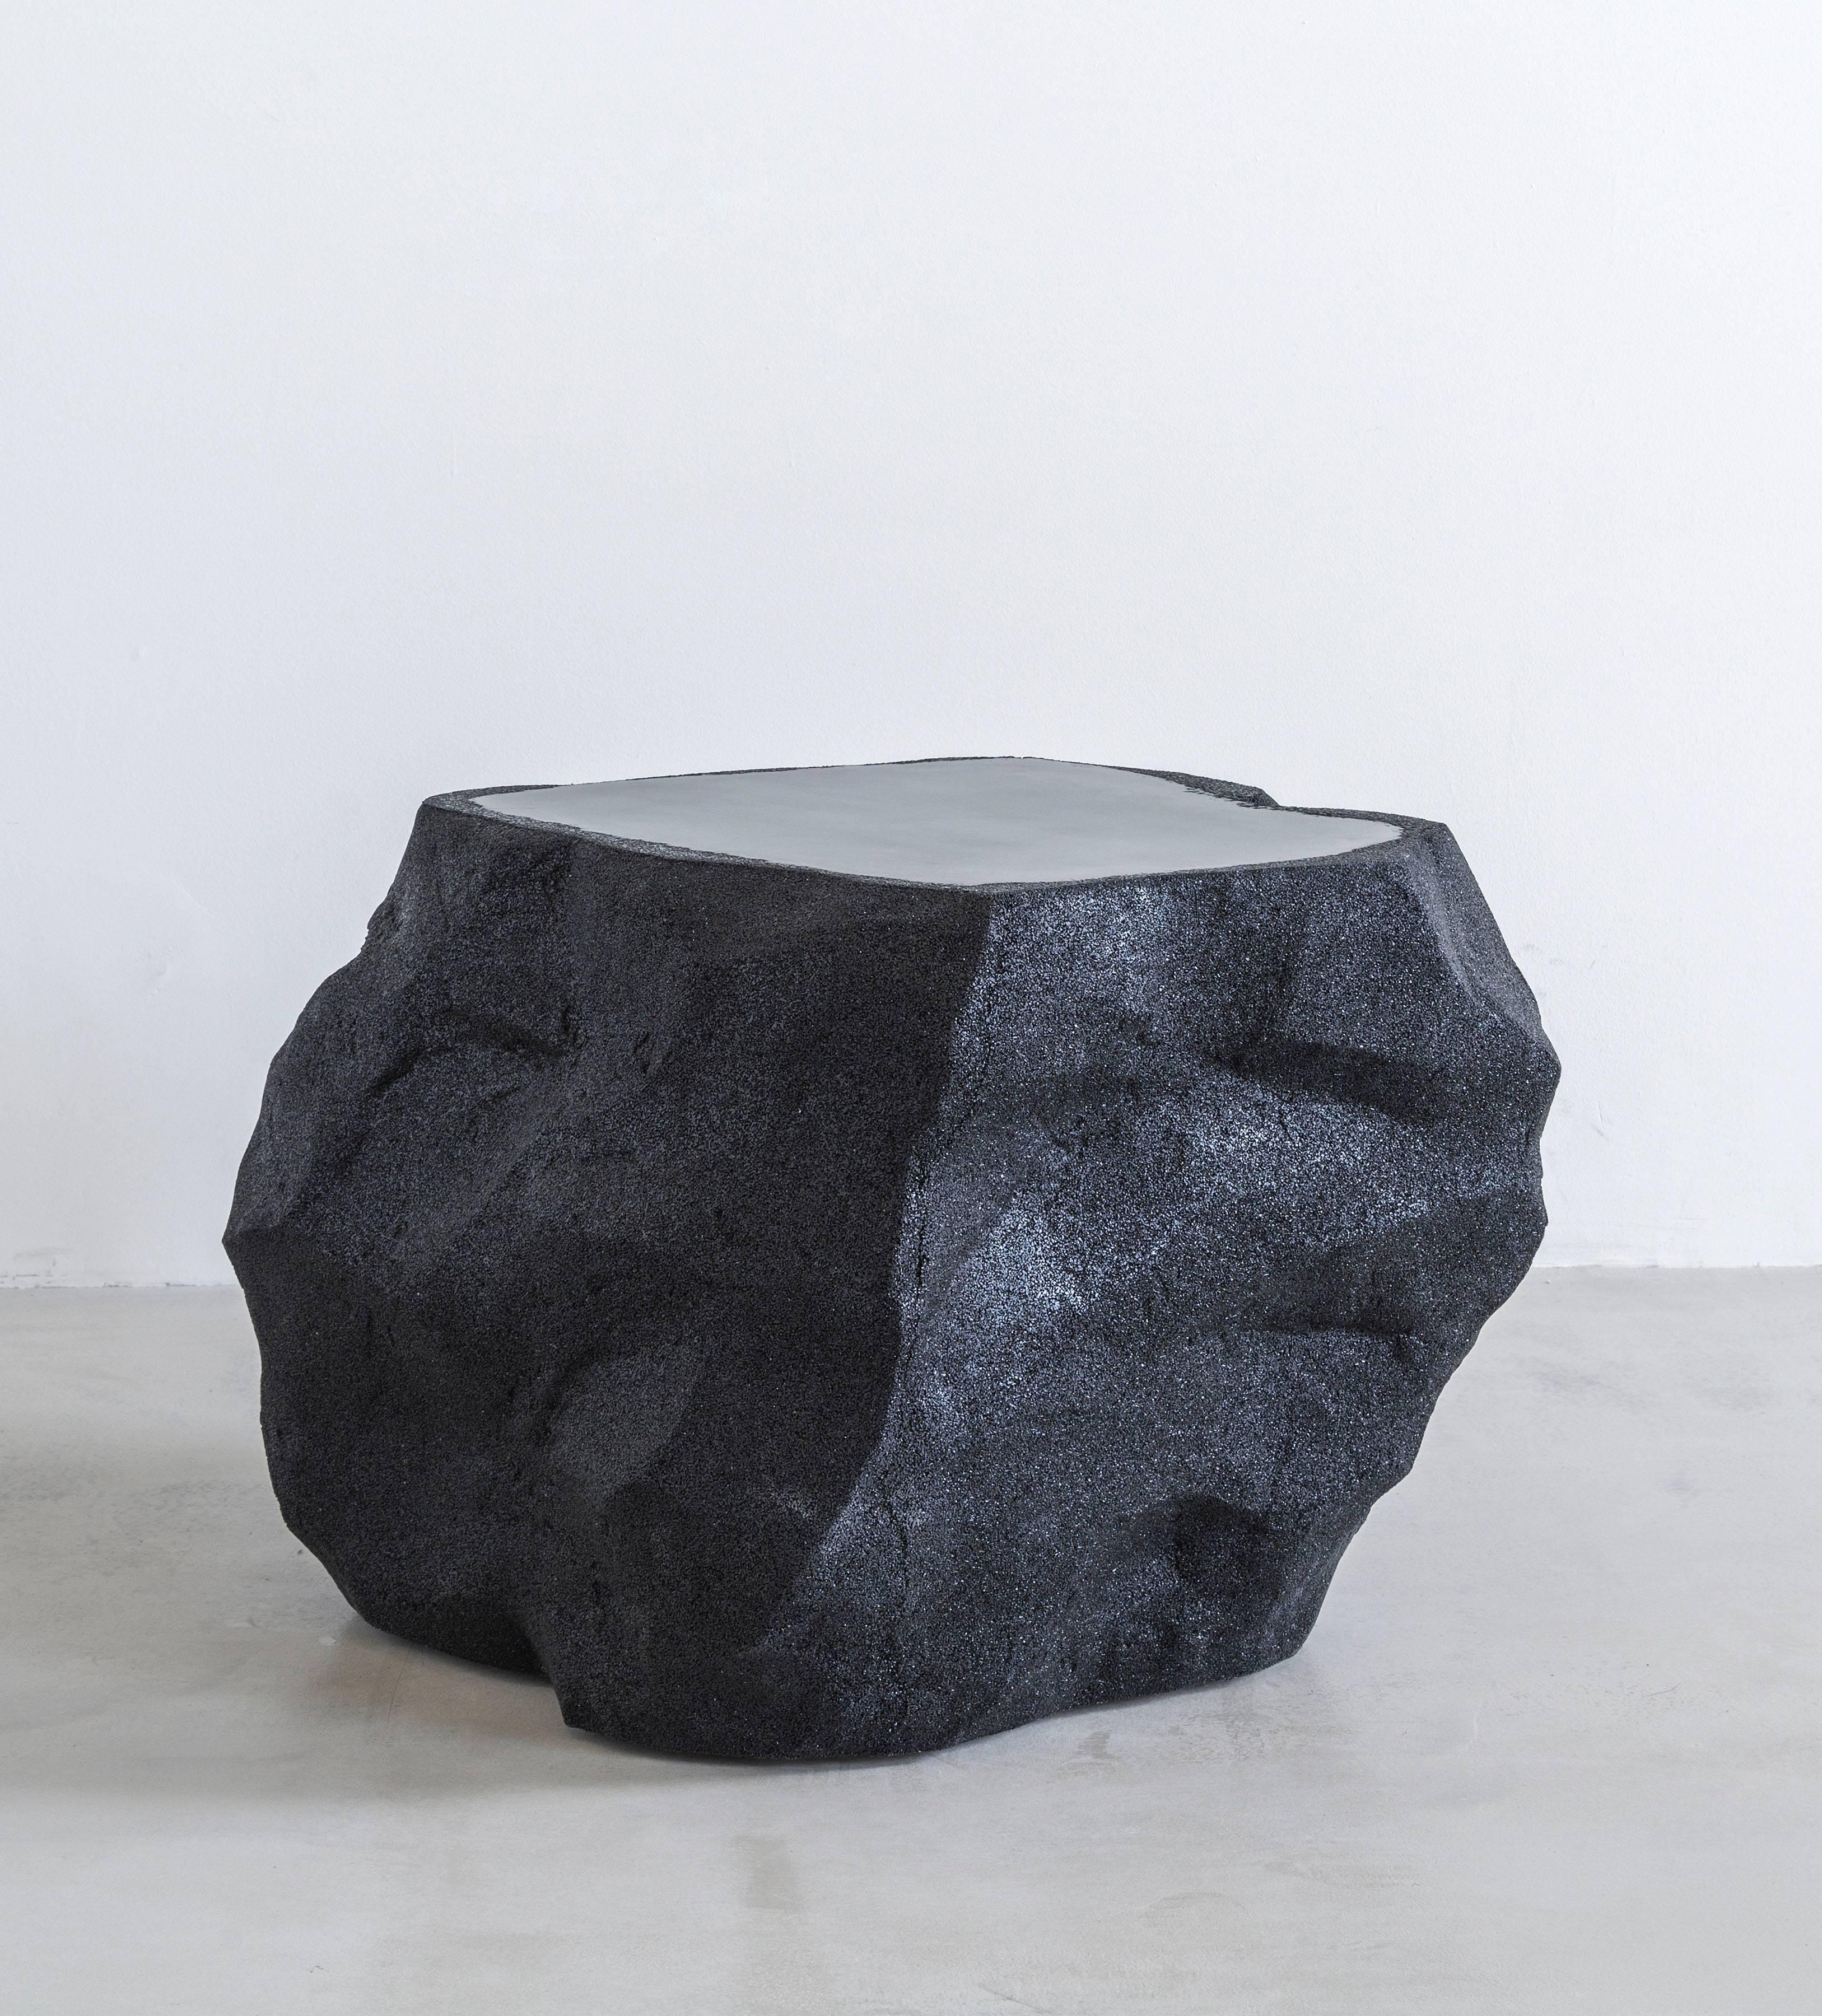 Composed from cement and silica, the jagged structure creates a surface of texture and smoothness reminiscent of a slab of earth. The piece maintains an organic, terrain-like sensibility through the hand-formed black materials, in strict contrast to